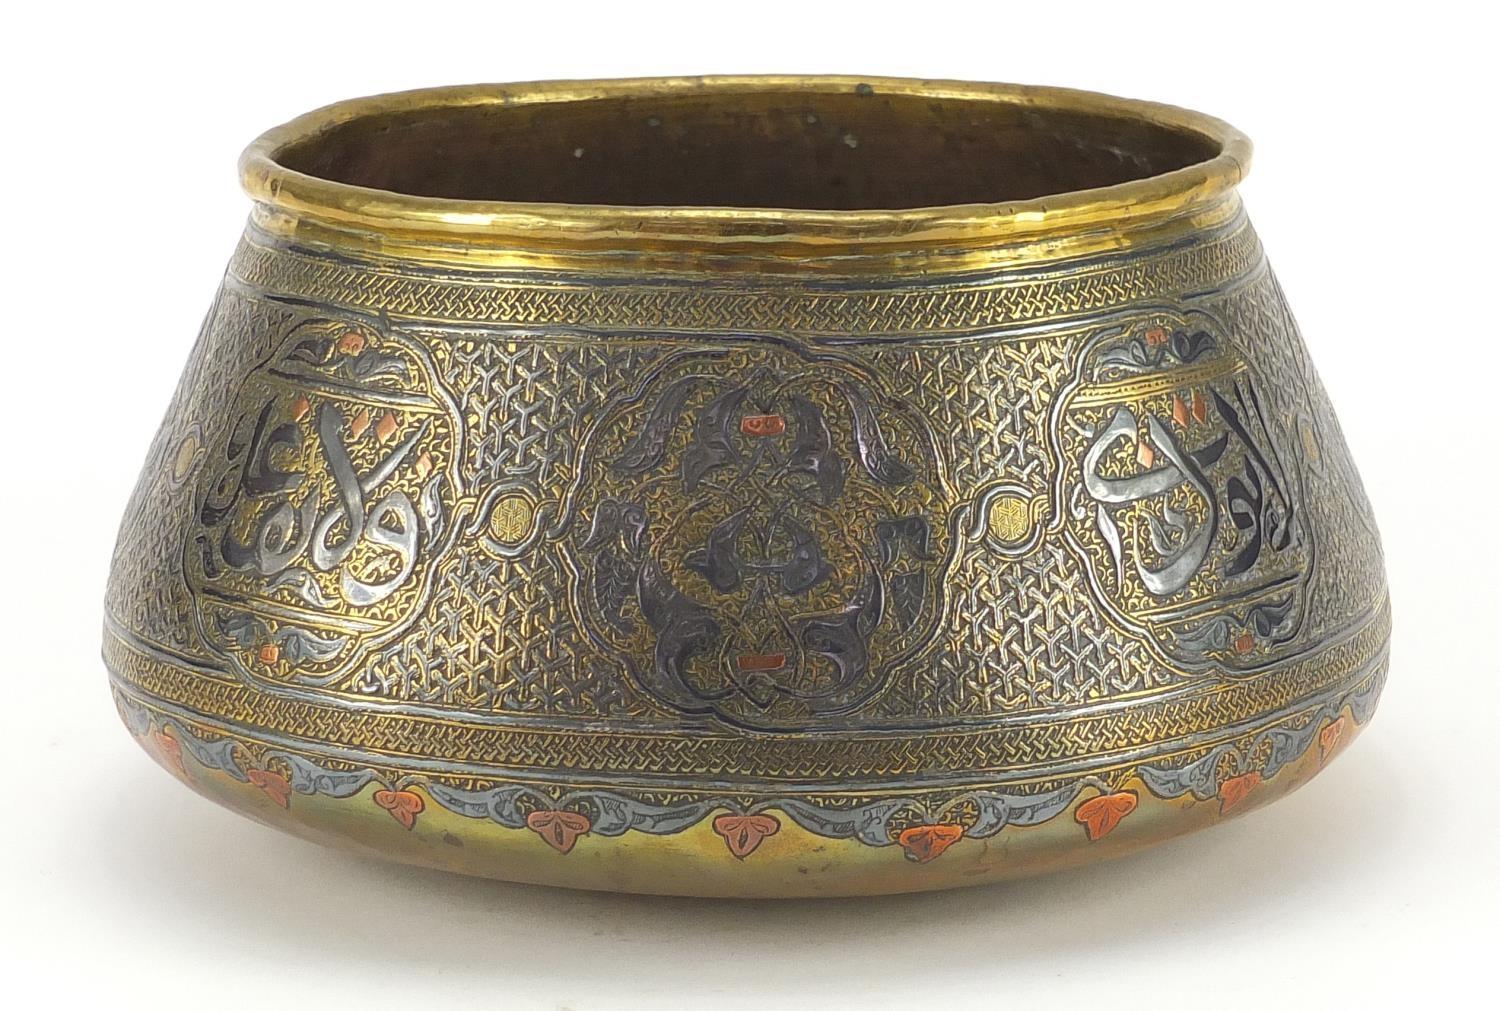 Cairoware brass bowl with silver inlay decorated with script and floral motifs, 25cm in diameter :